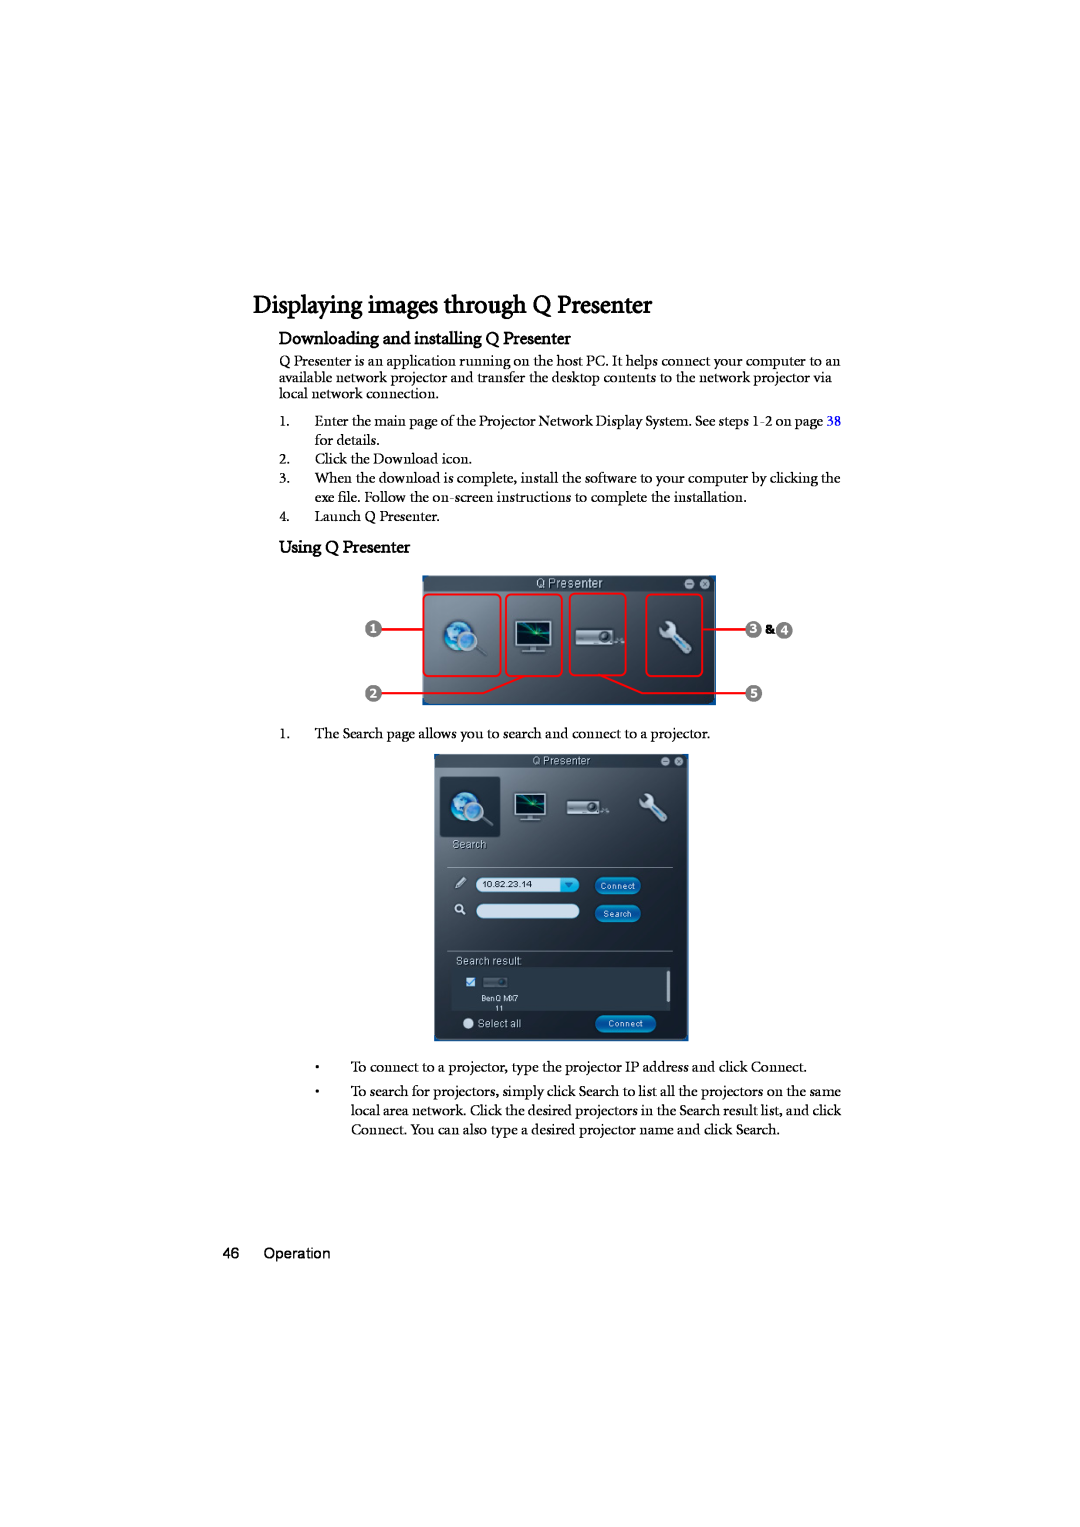 BenQ MX880UST user manual Displaying images through Q Presenter, Downloading and installing Q Presenter, Using Q Presenter 